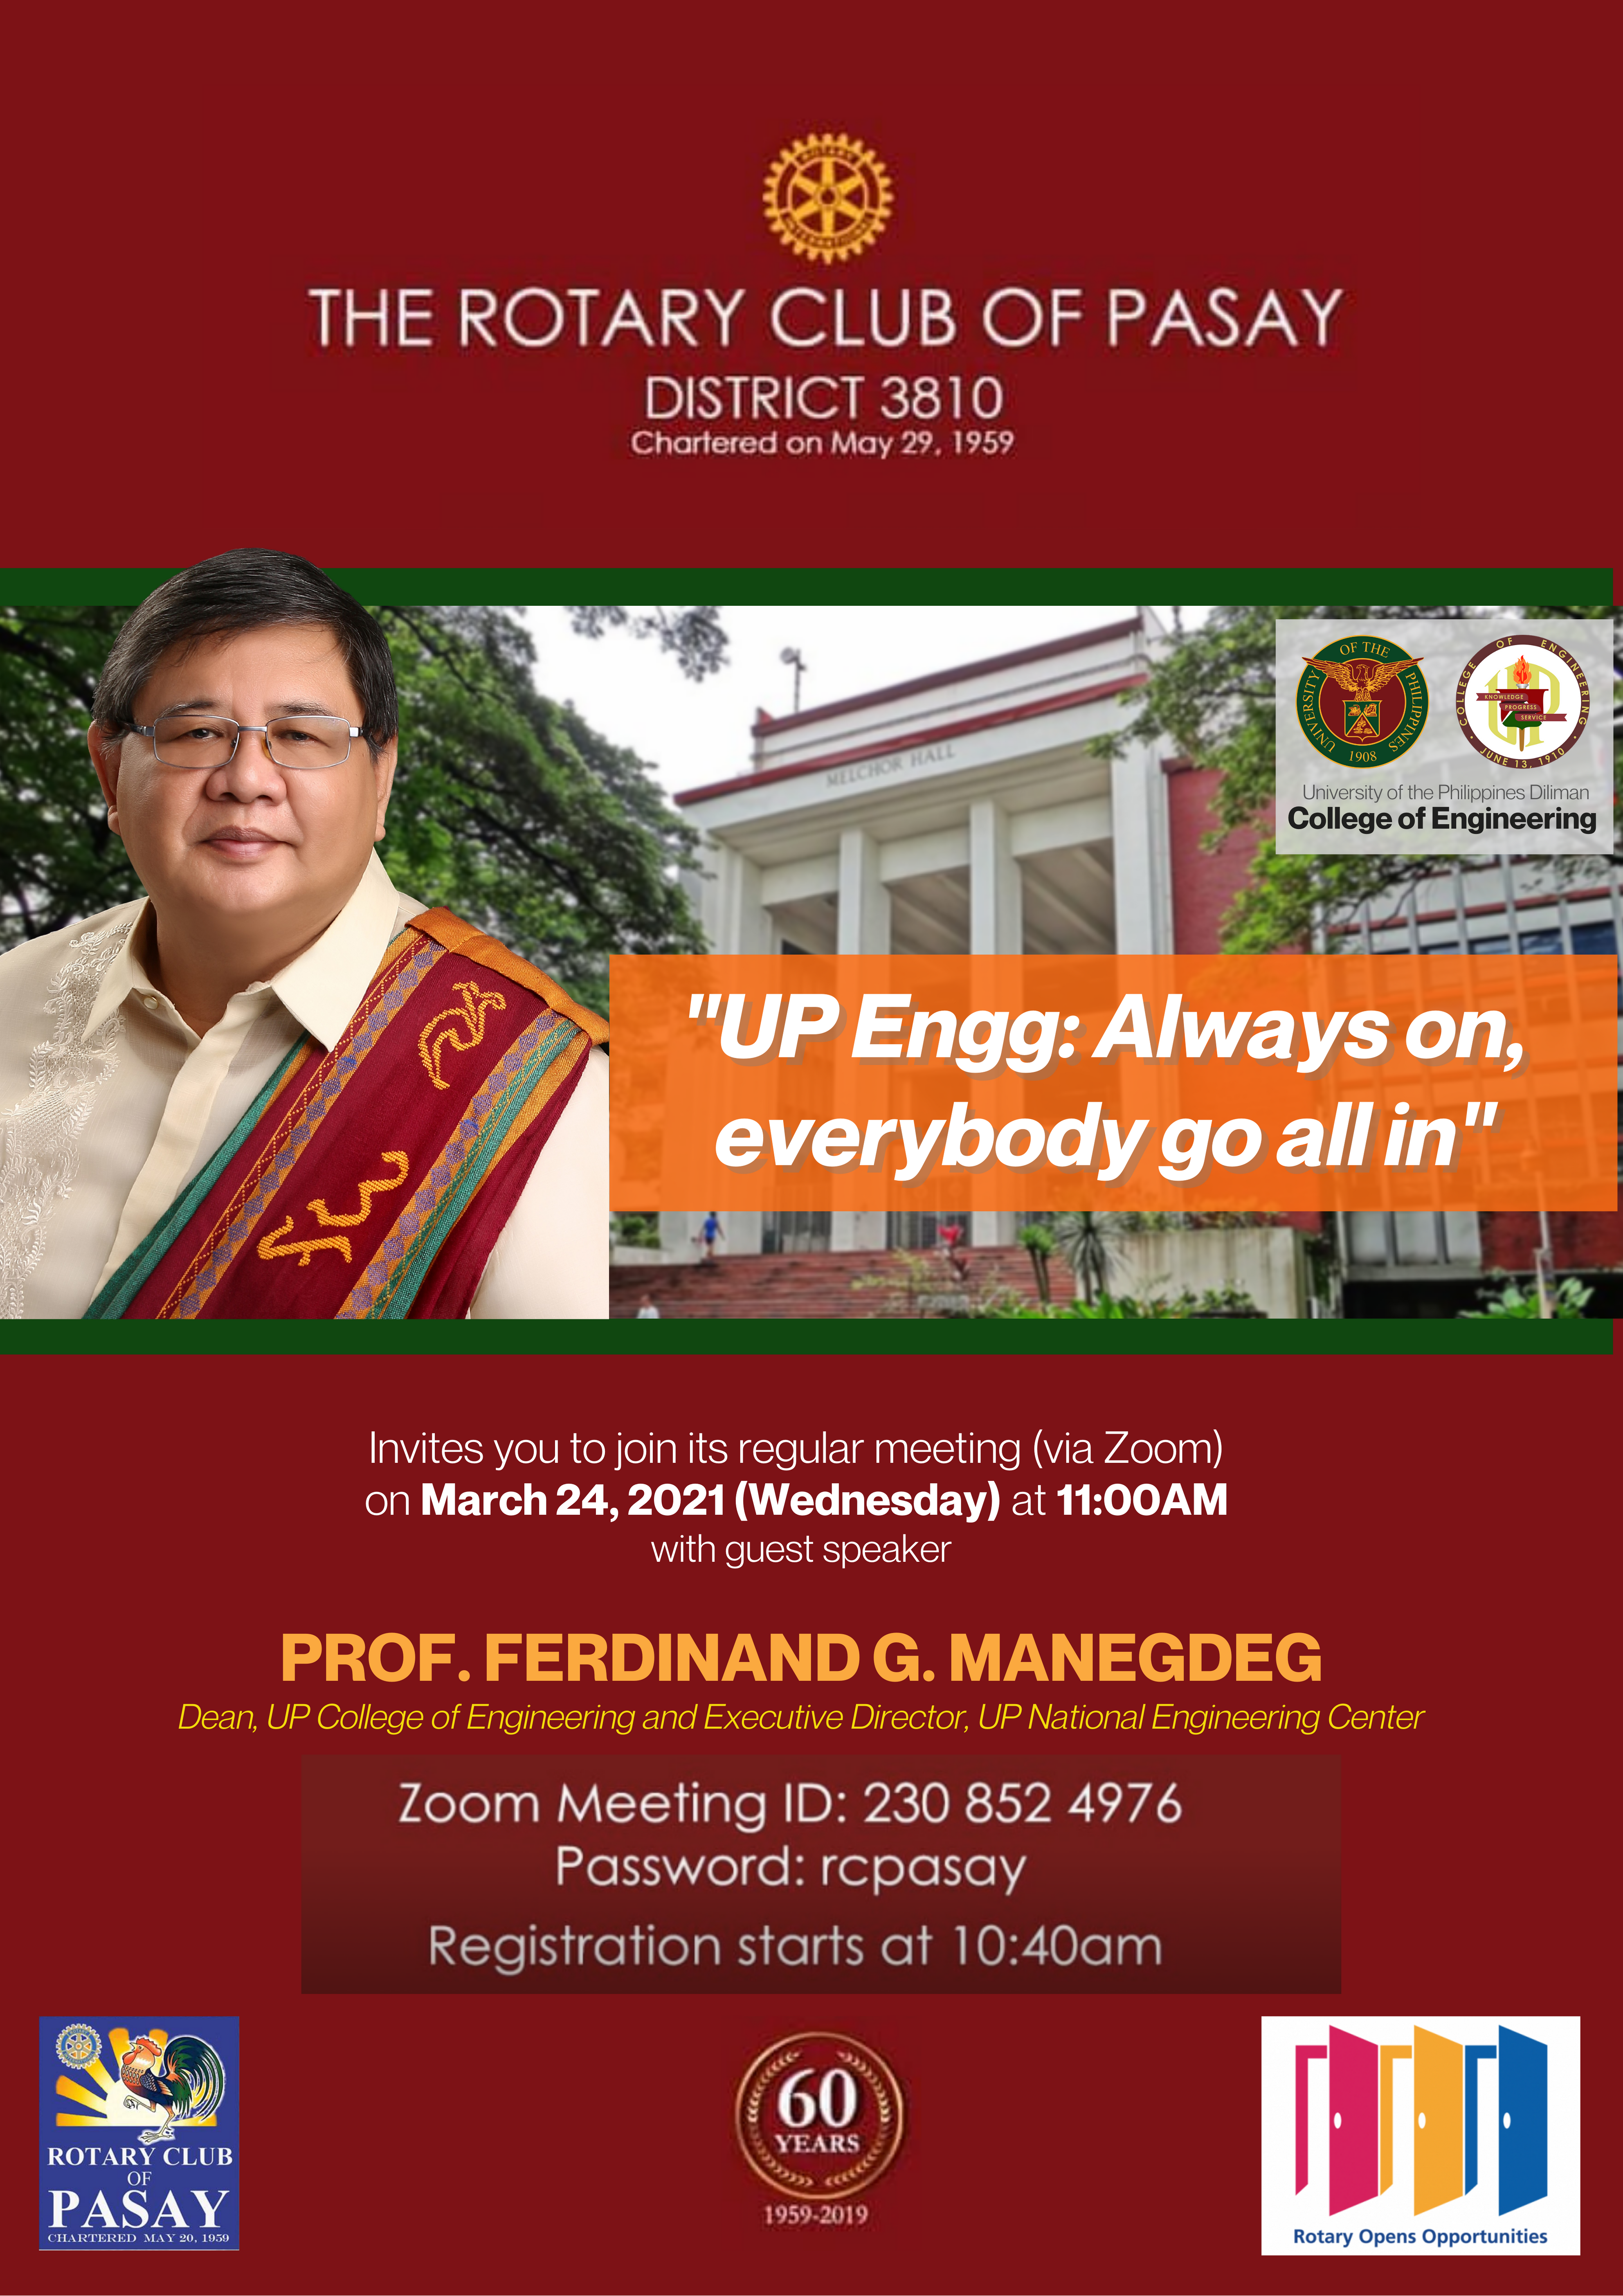 Rotary Club of Pasay will have CoE Dean as guest speaker